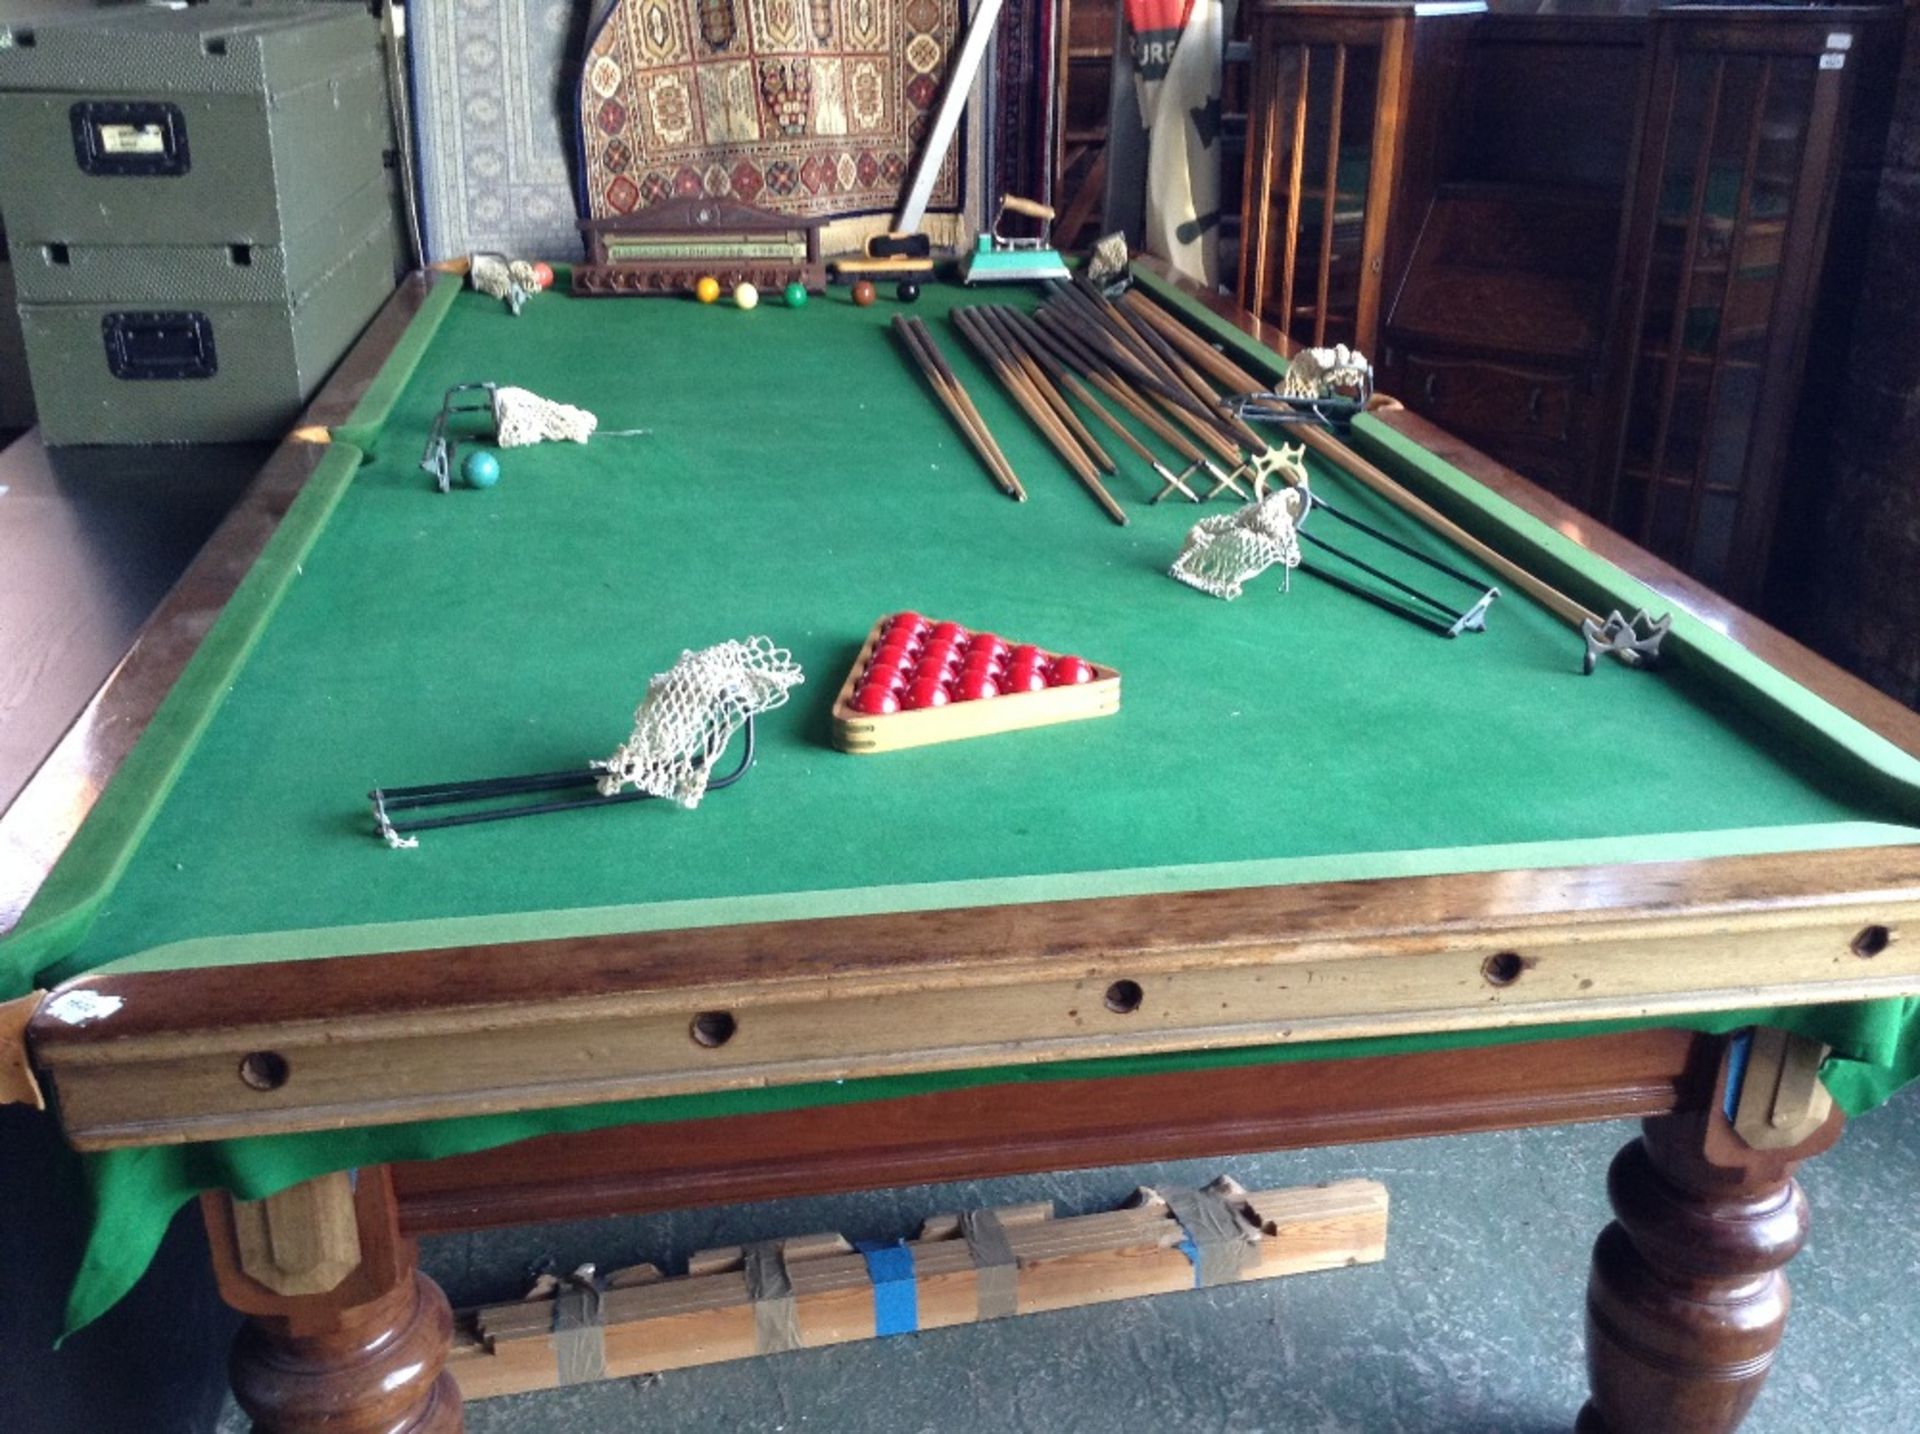 SNOOKER TABLE - 7/8 FULL SIZE (collection only, de